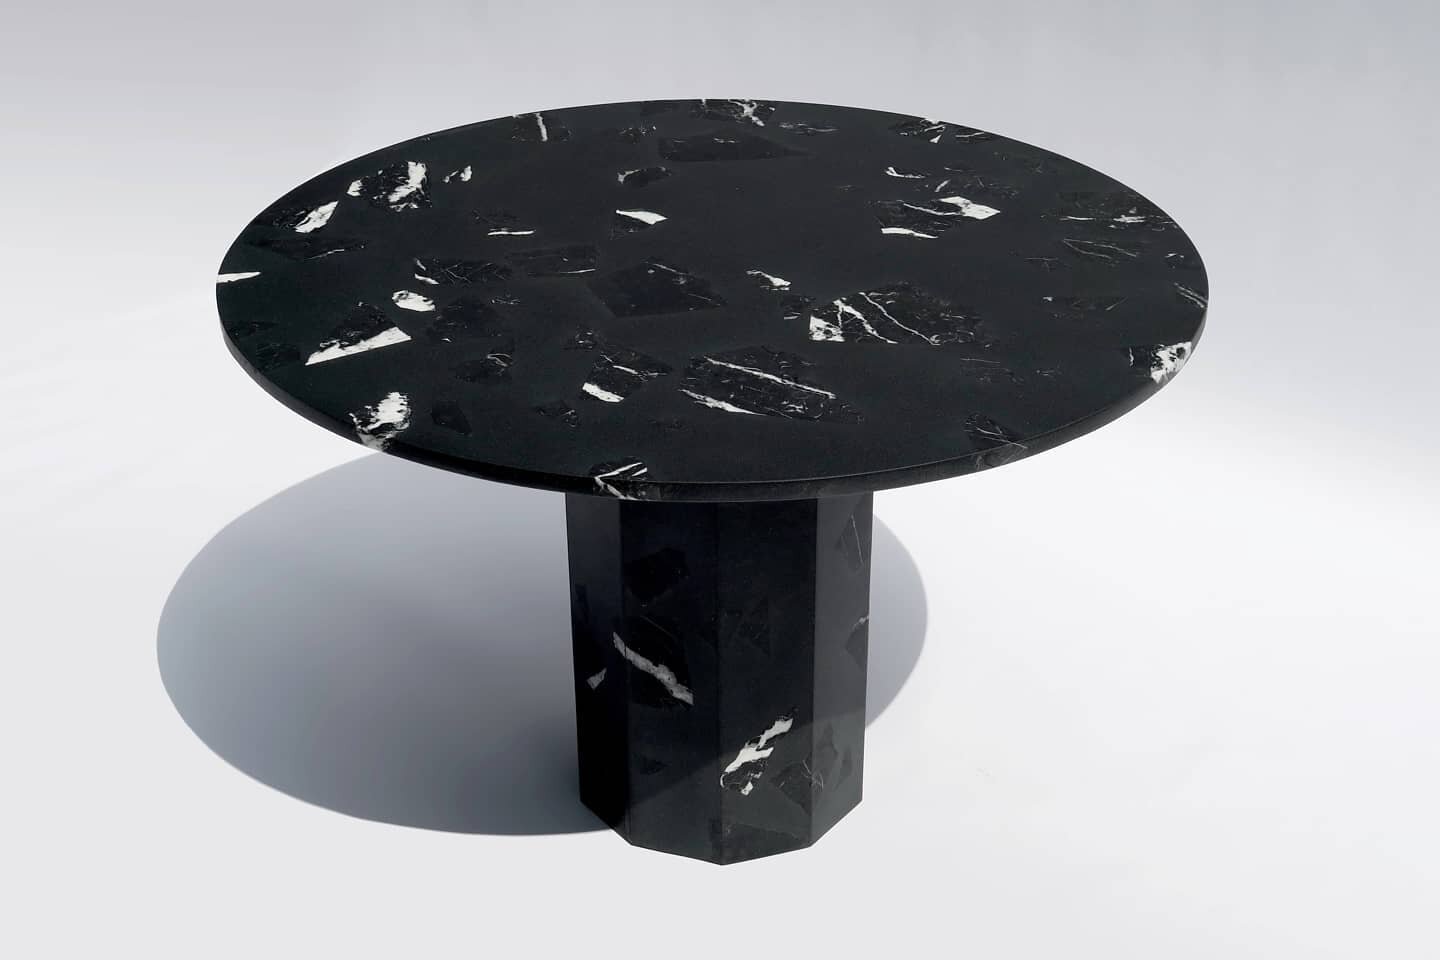 BLACKOUT. One of our standard 4 seaters pedestal dining tables in Nero Marquina 'special' on black.
.
.
.
#altrock #altrocksurfaces #blackterrazzo #terrazzo #black #allblack #blackout #neromarquina #customterrazzo #nero #marble #naturalstone #diningt